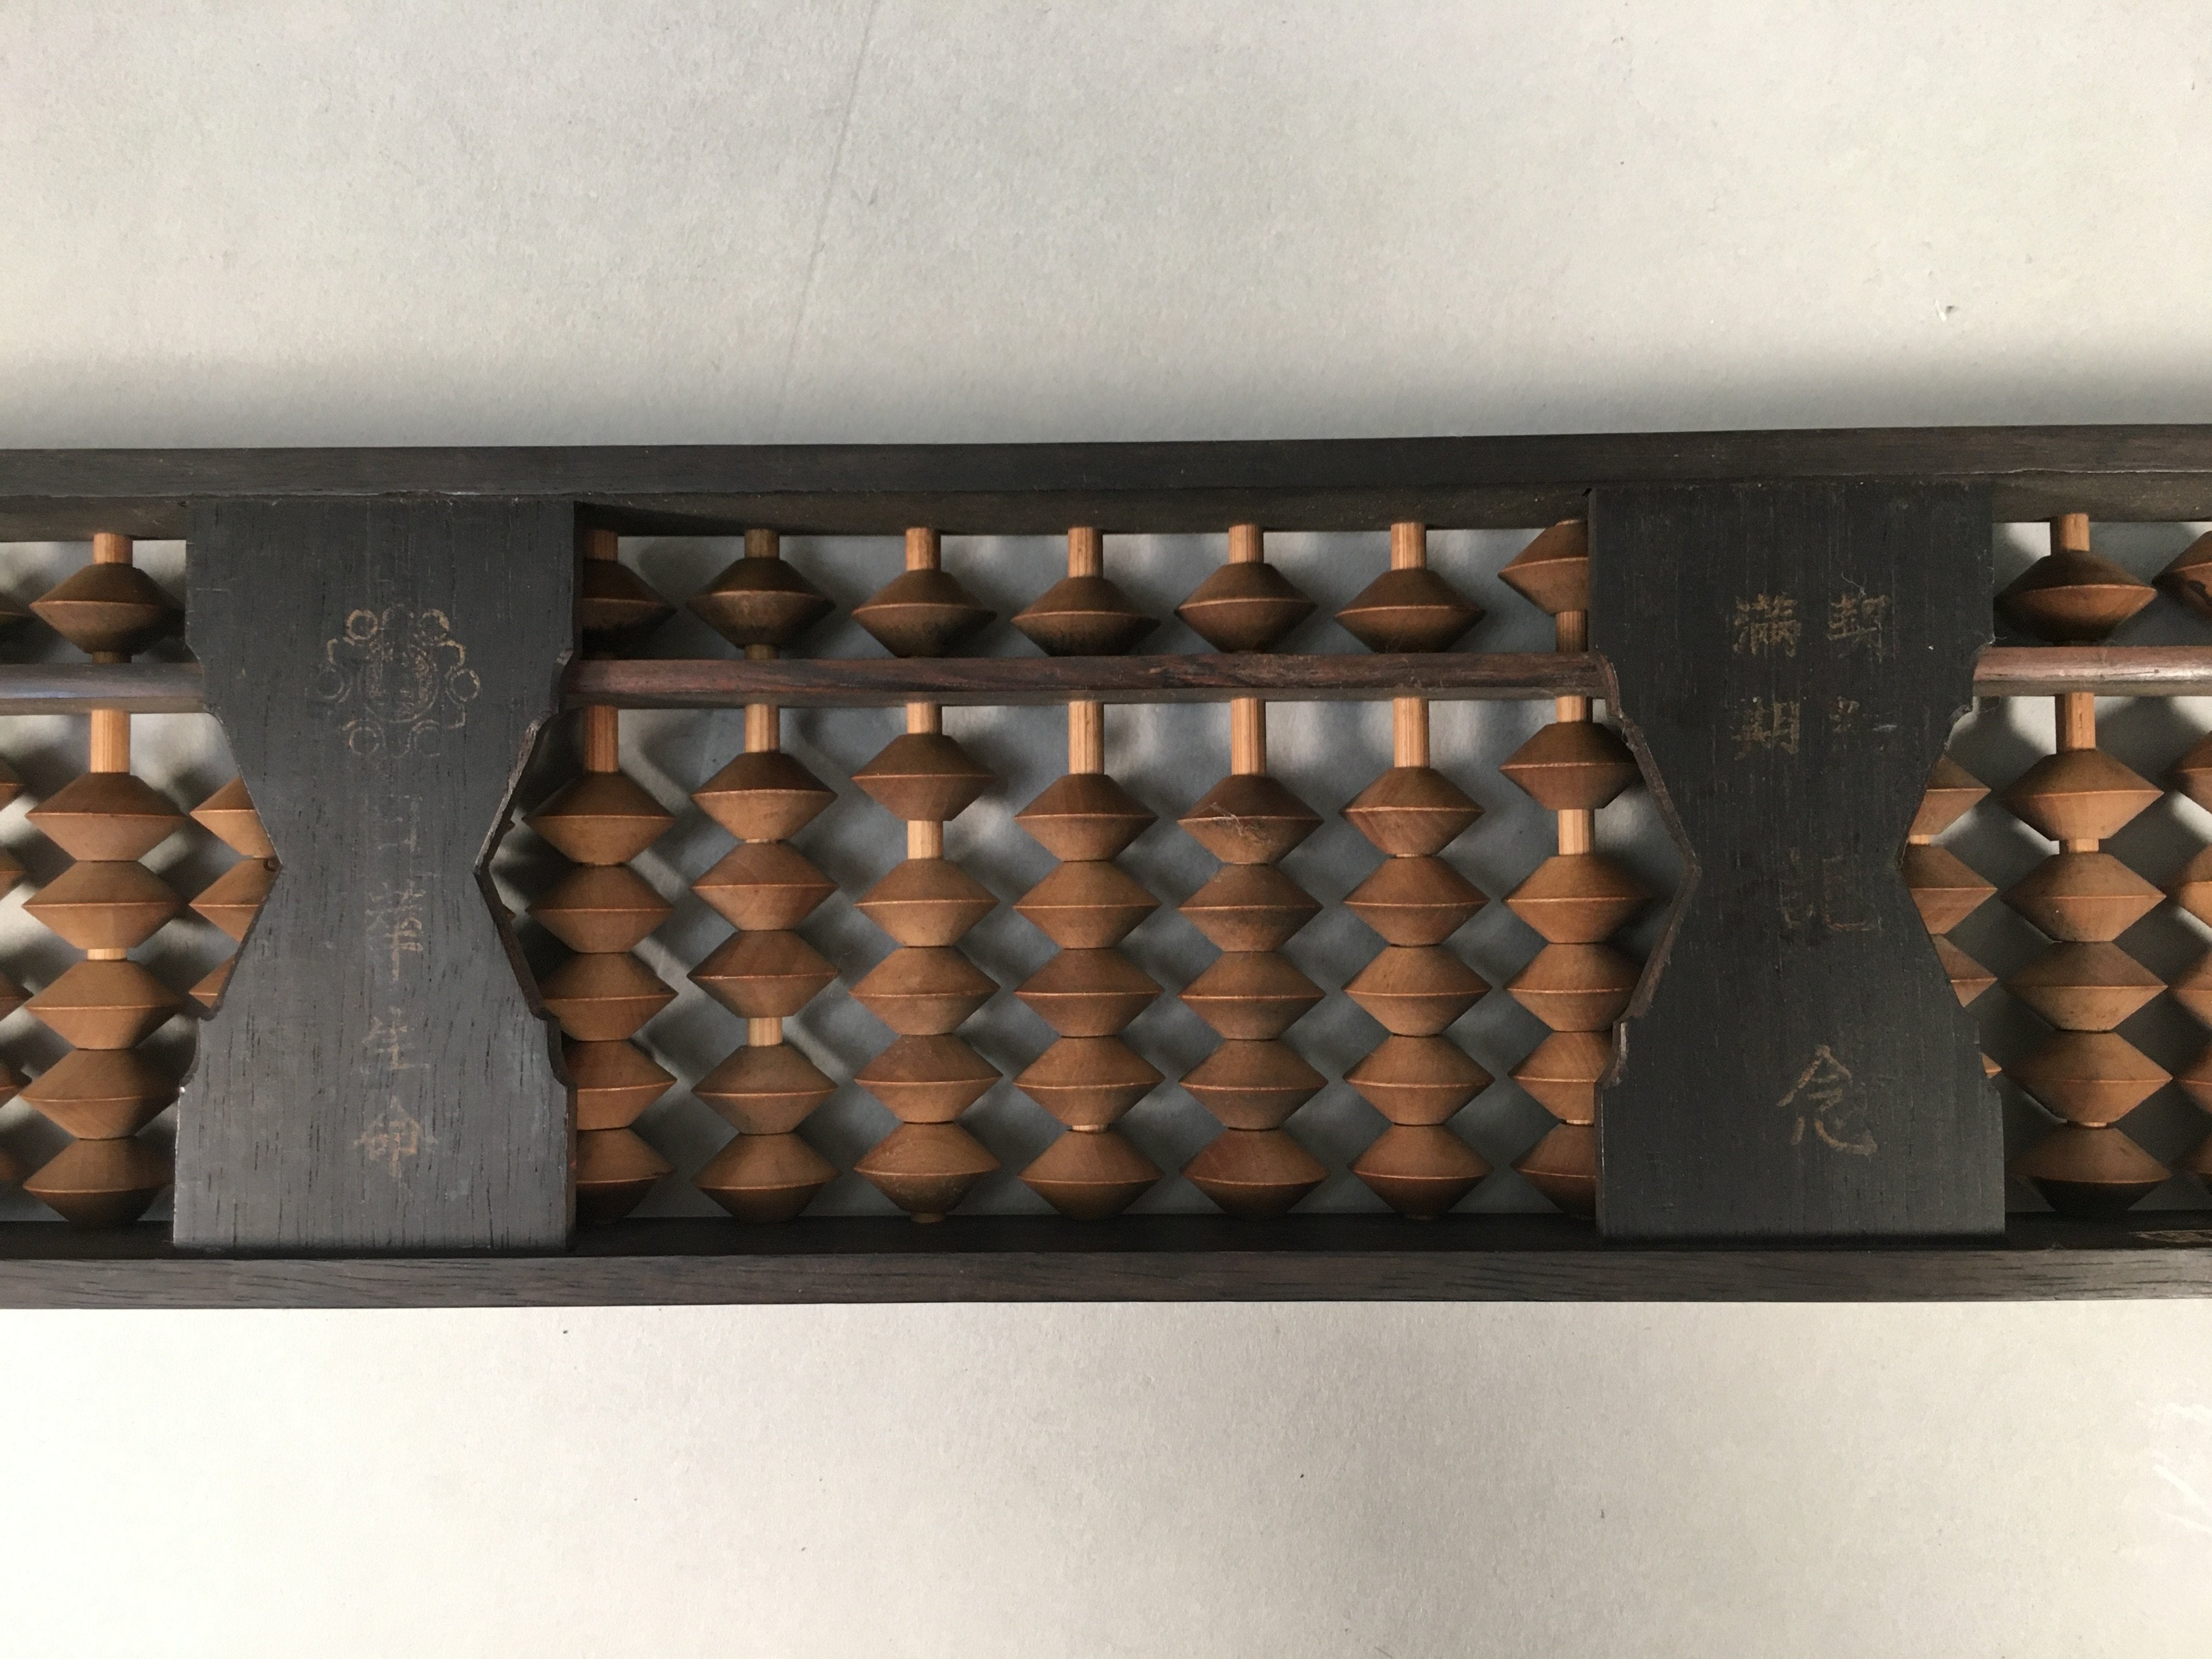 Japanese Wooden Abacus Calculating Tool 1/5 Beads 21 Rows Vtg Soroban ST46